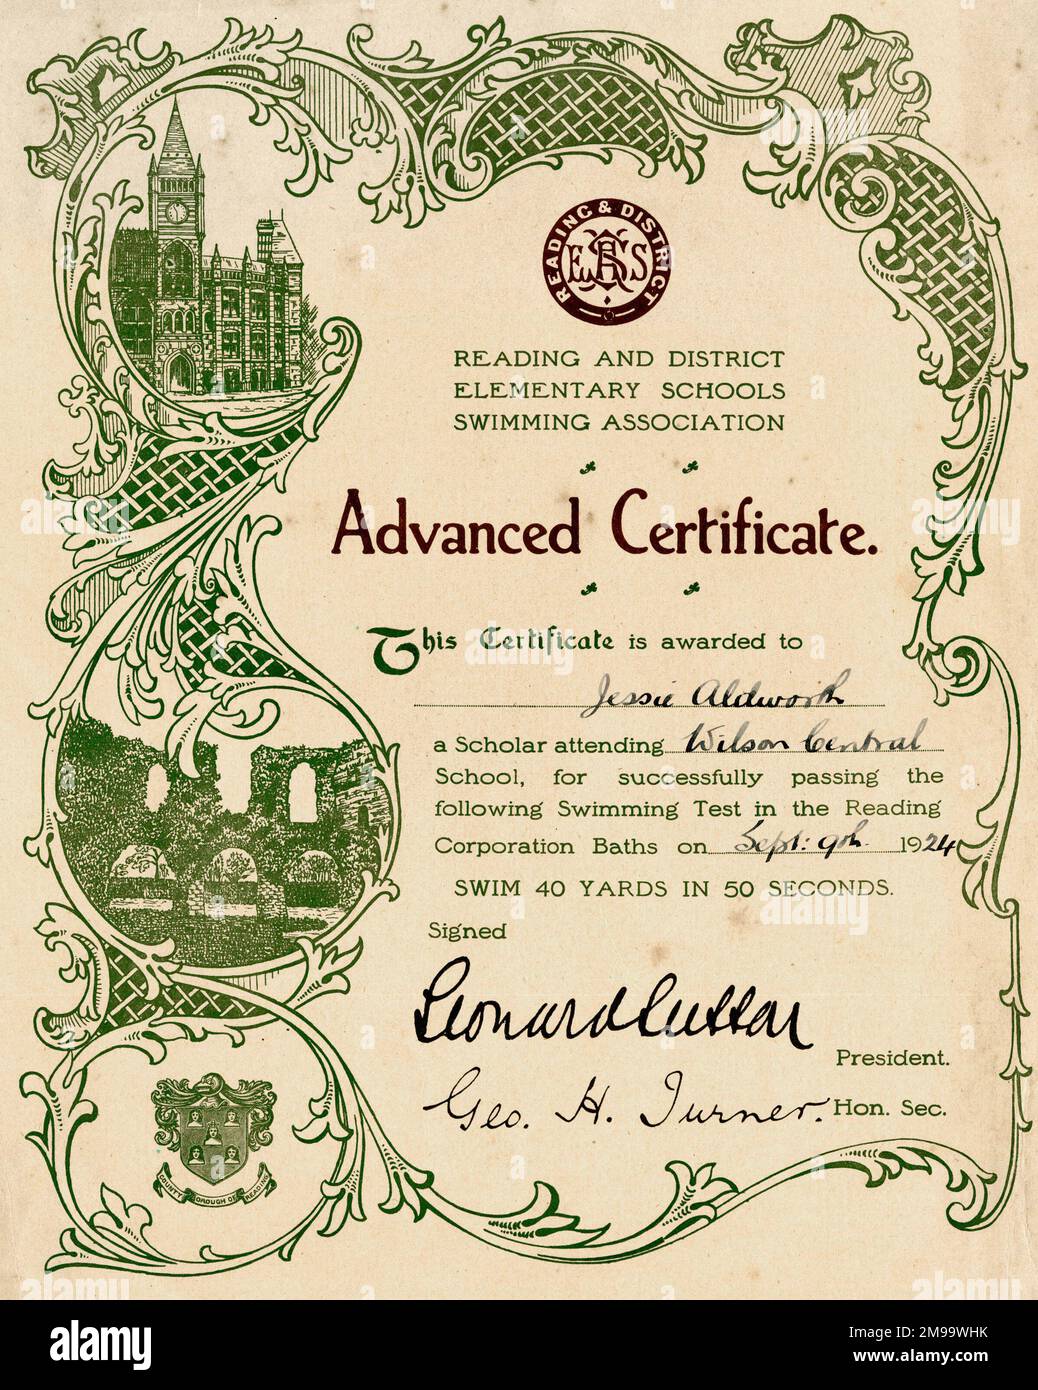 Advanced Swimming Certificate, Reading and District Elementary Schools Swimming Association, for swimming 40 yards in 50 seconds. Stock Photo